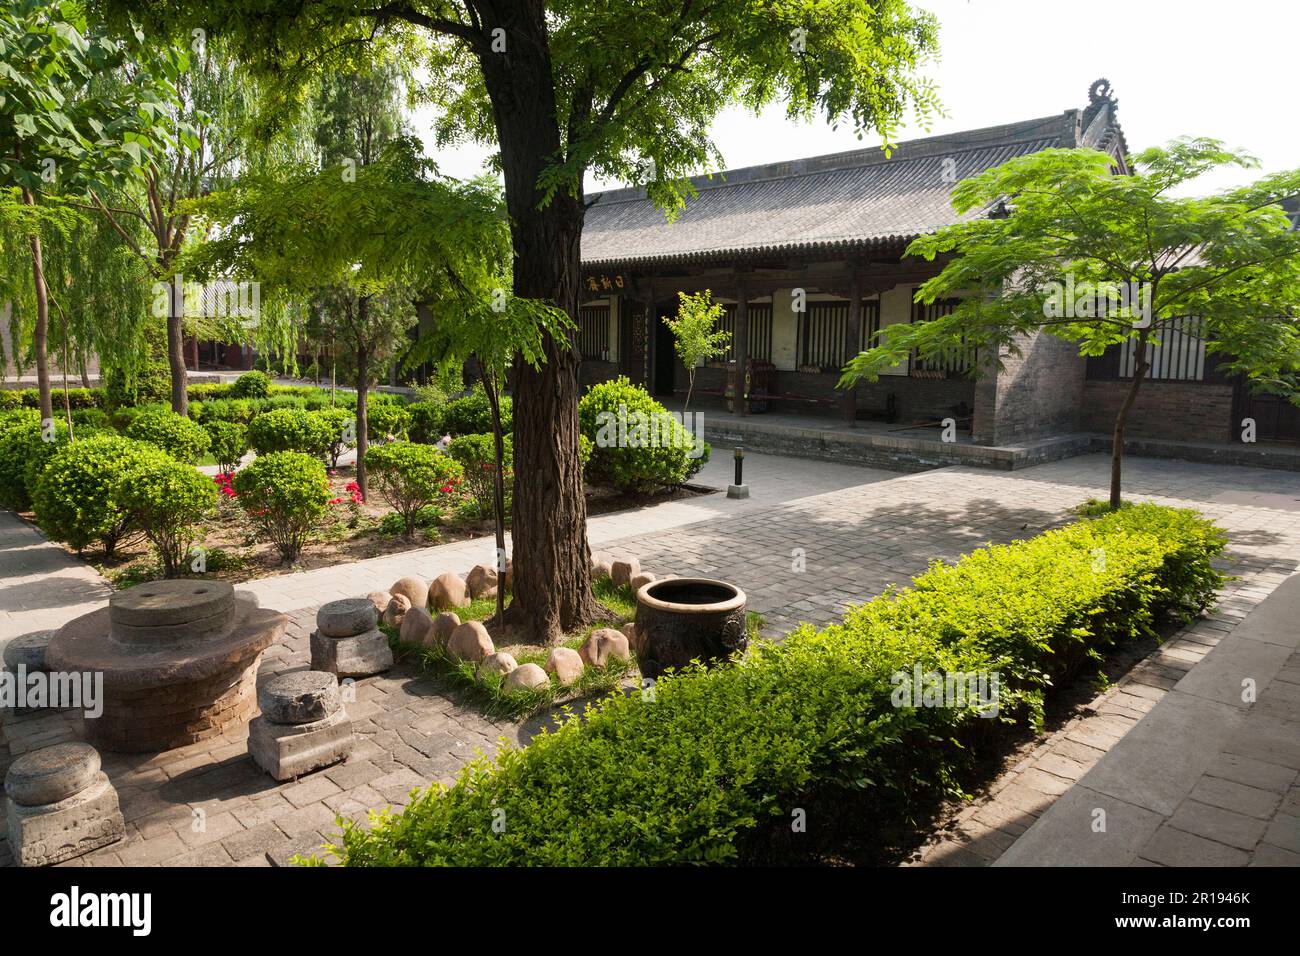 Beautiful garden and building / buildings in grounds of The Pingyao Confucian Temple situated in old town Pingyao, Jinzhong, Shanxi, PRC. China. (125) Stock Photo